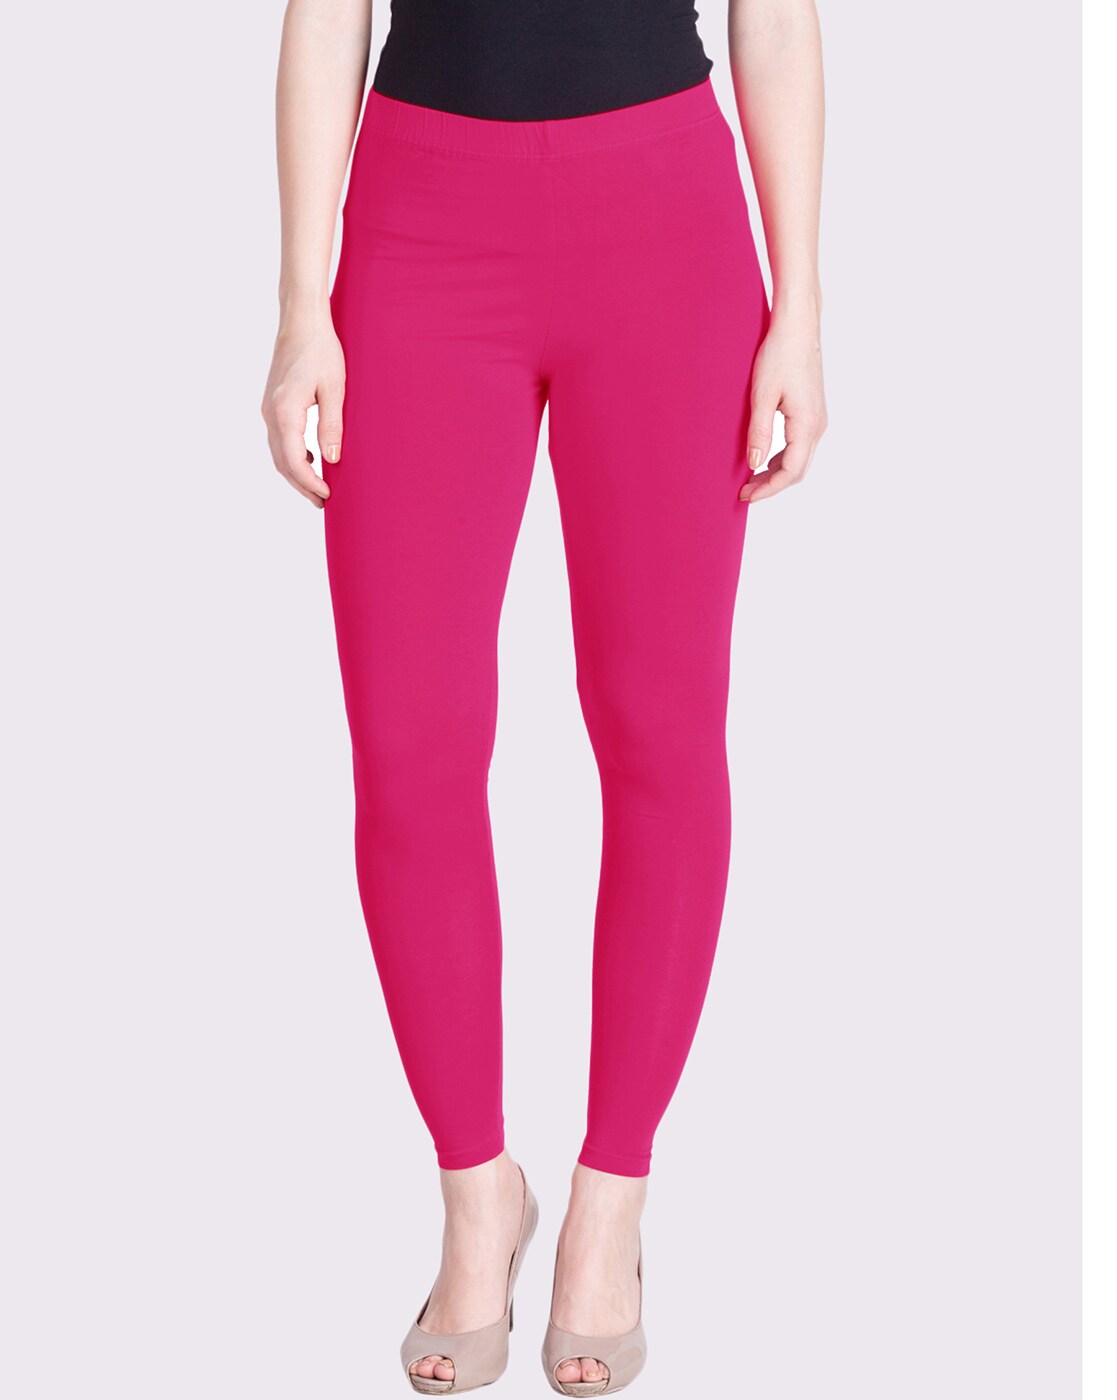 Breathable Push Up Leggings Lyra With Side Pockets For Women Quick Dry,  Elastic, And Perfect For Workouts And Fitness From Freshadang, $22.1 |  DHgate.Com